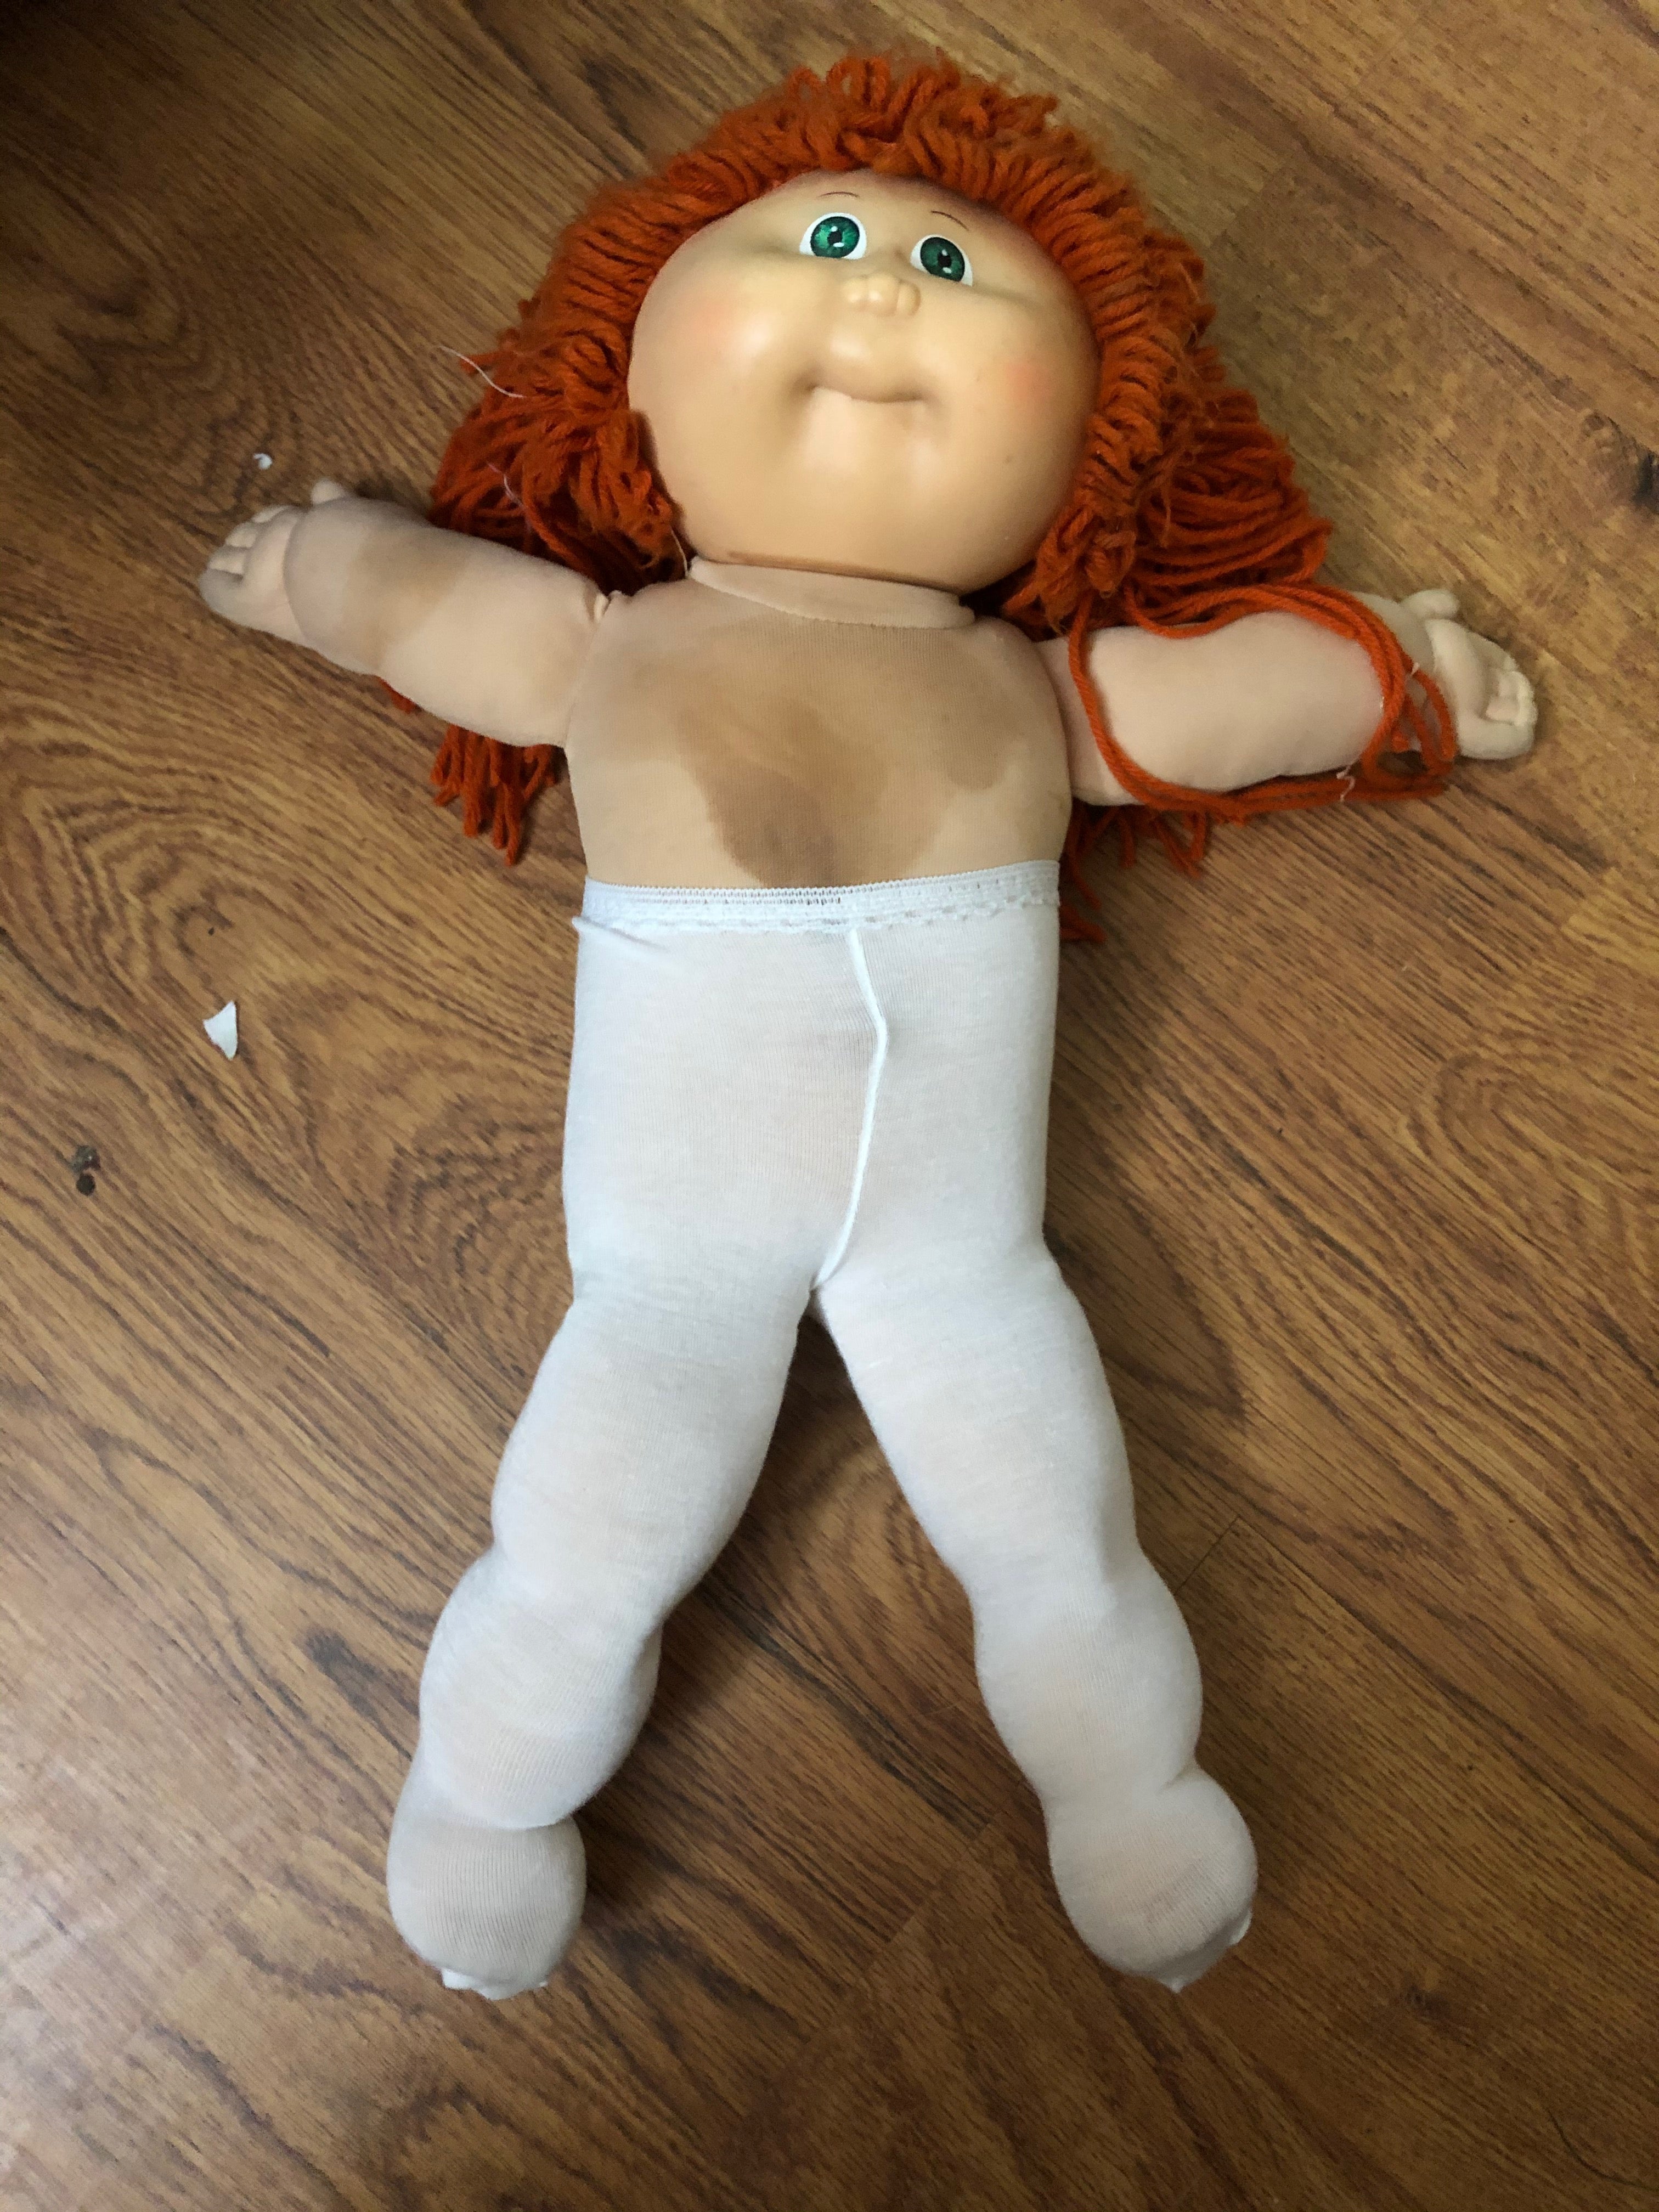 16" Cabbage Patch Kid